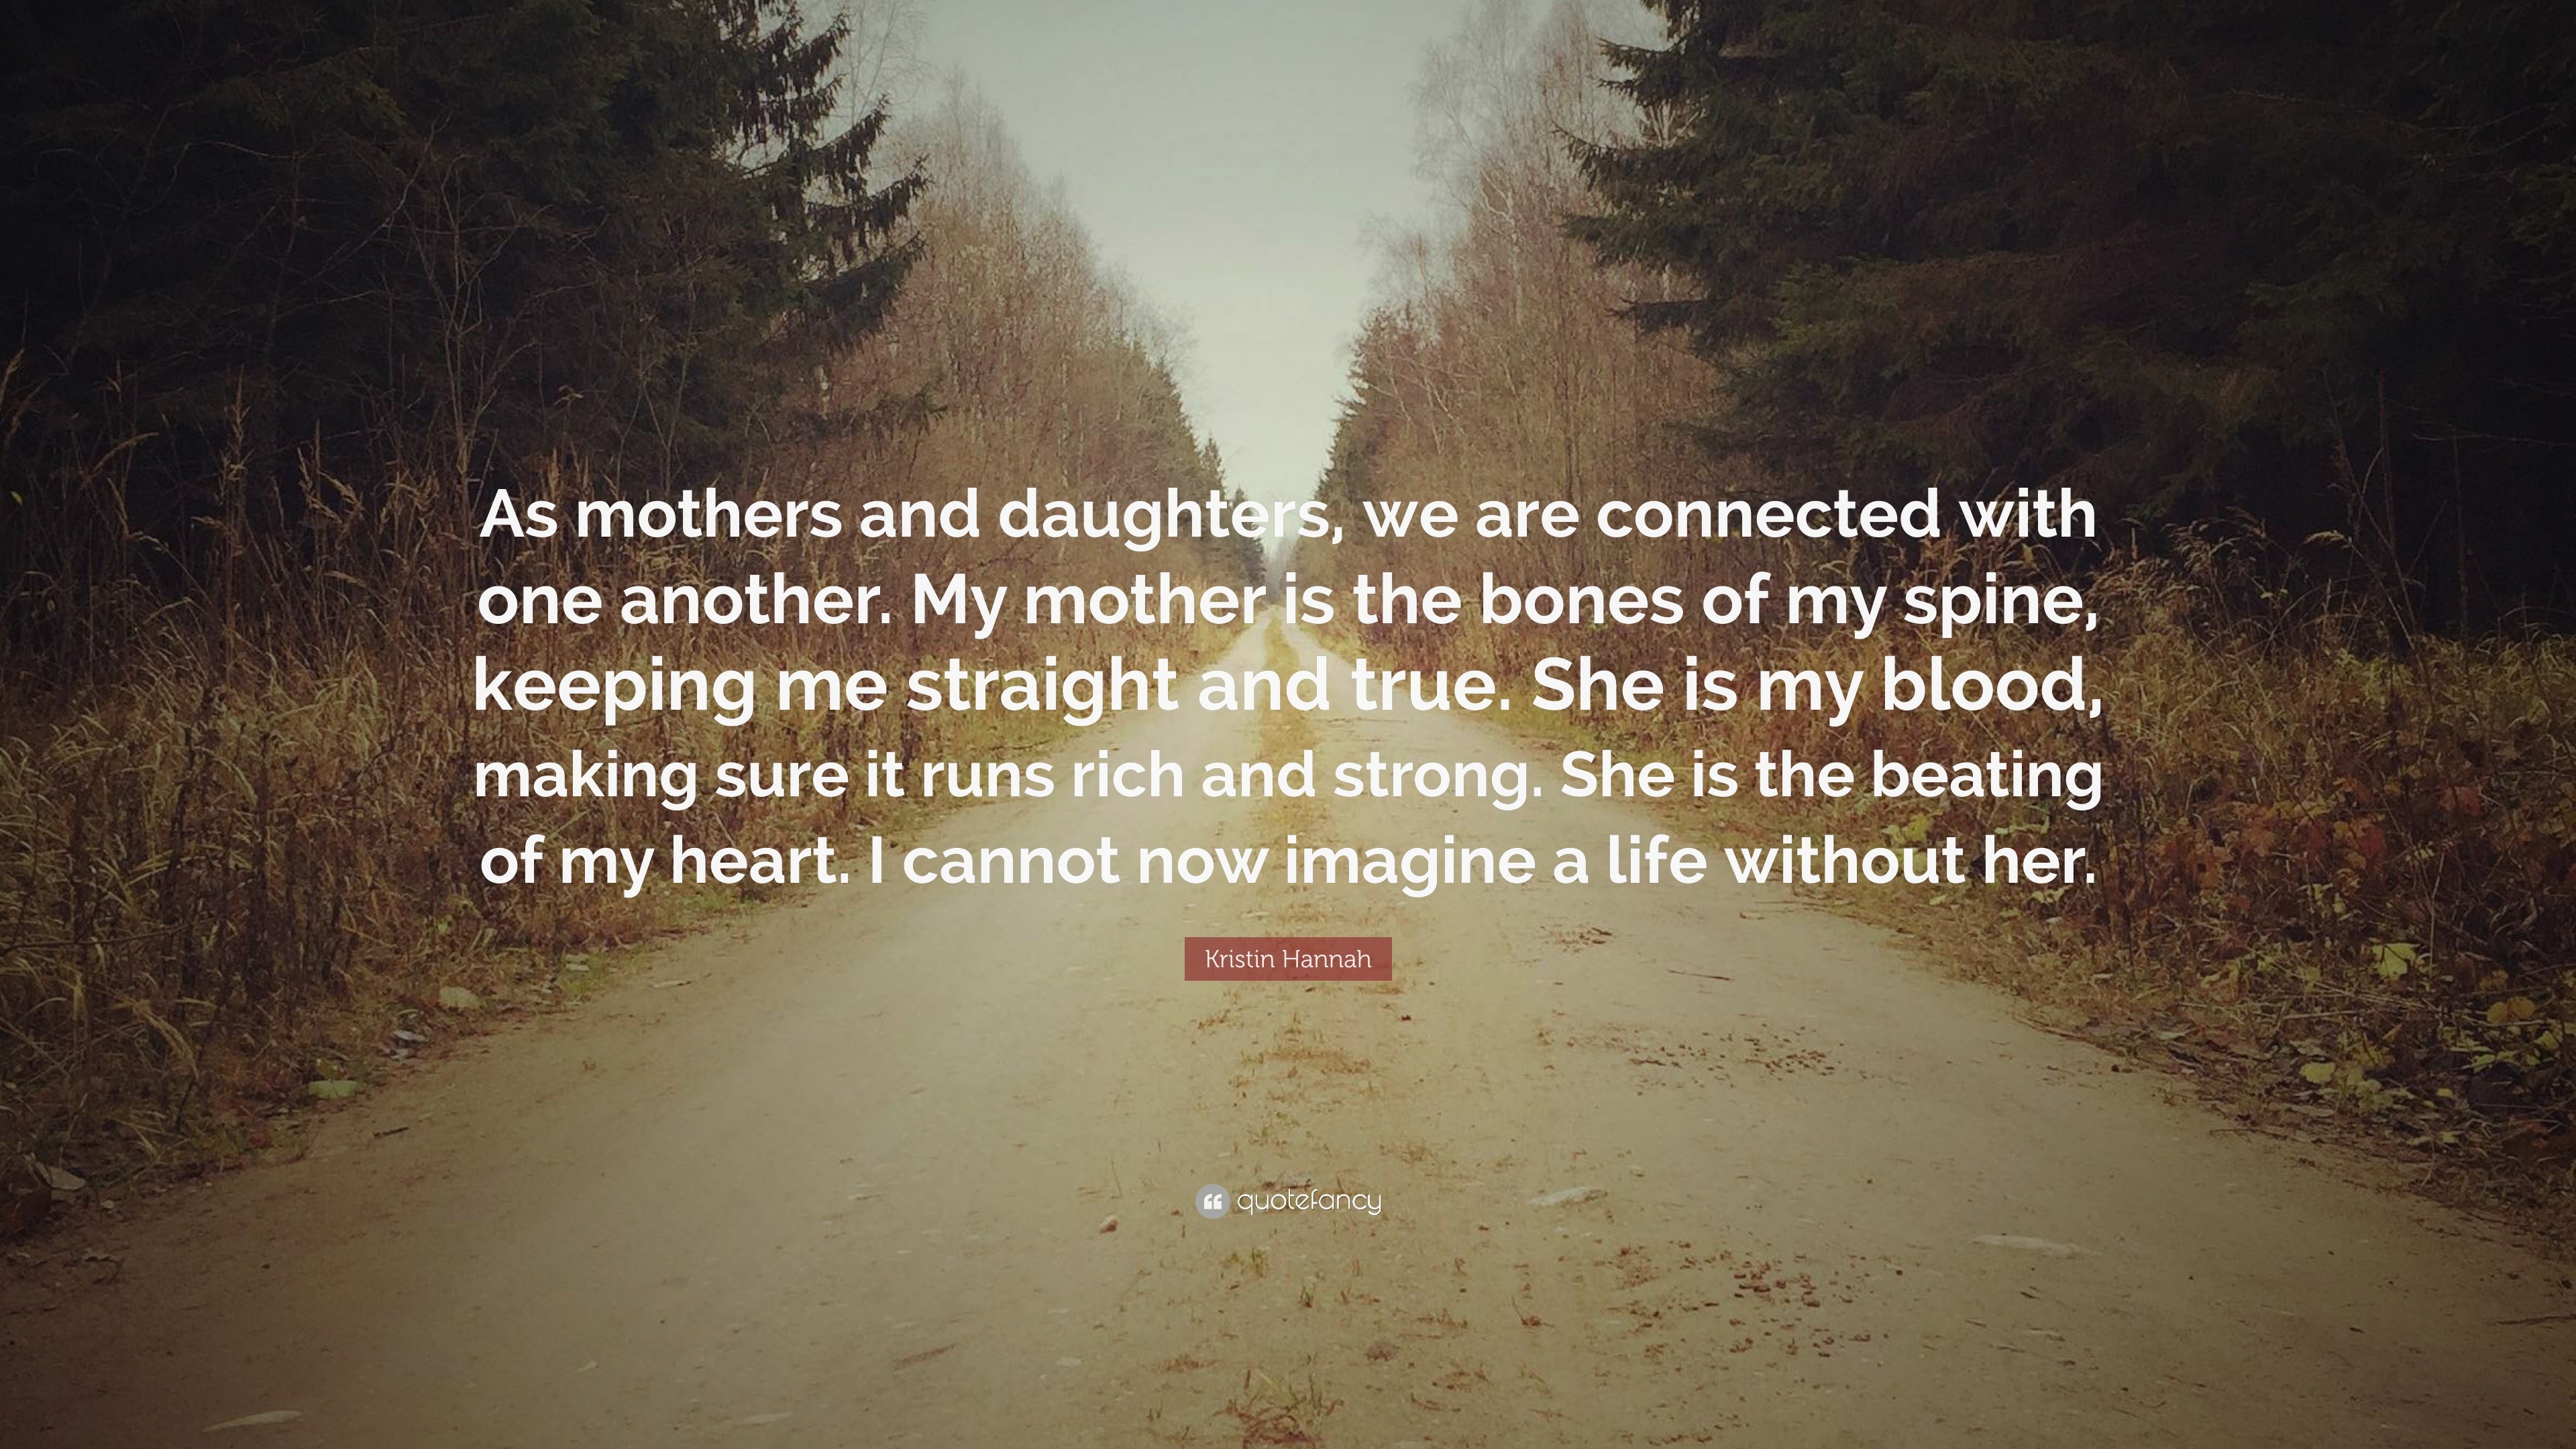 Kristin Hannah Quote “As mothers and daughters we are connected with one another